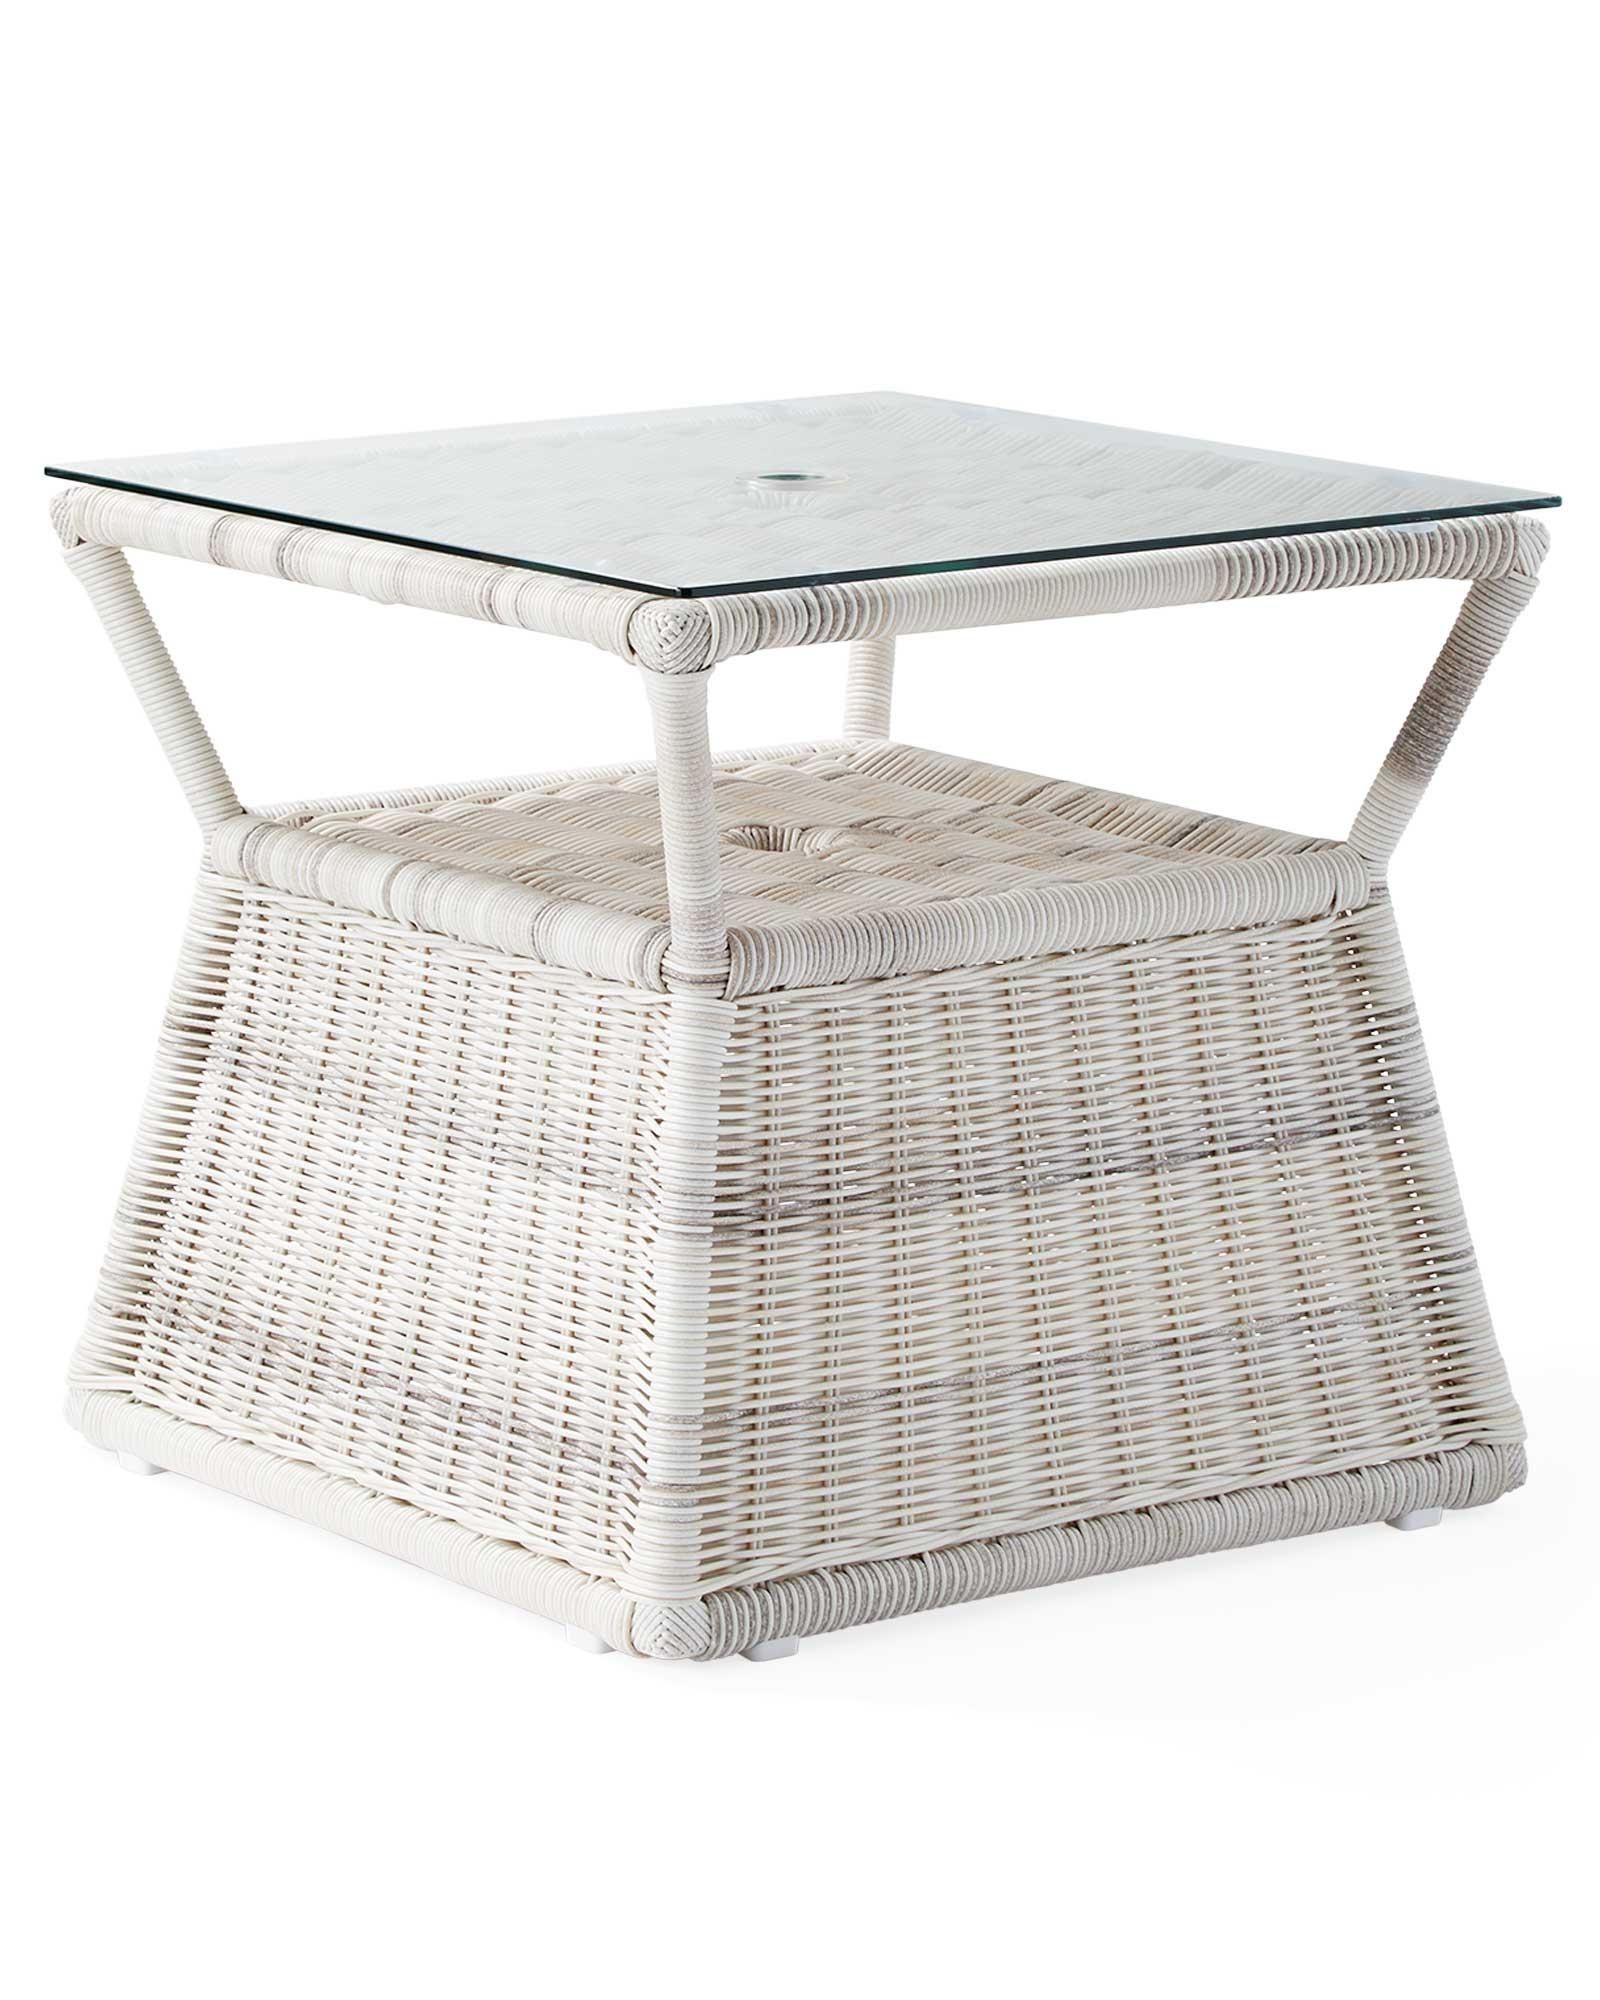 Pacifica Umbrella Side Table | Serena and Lily